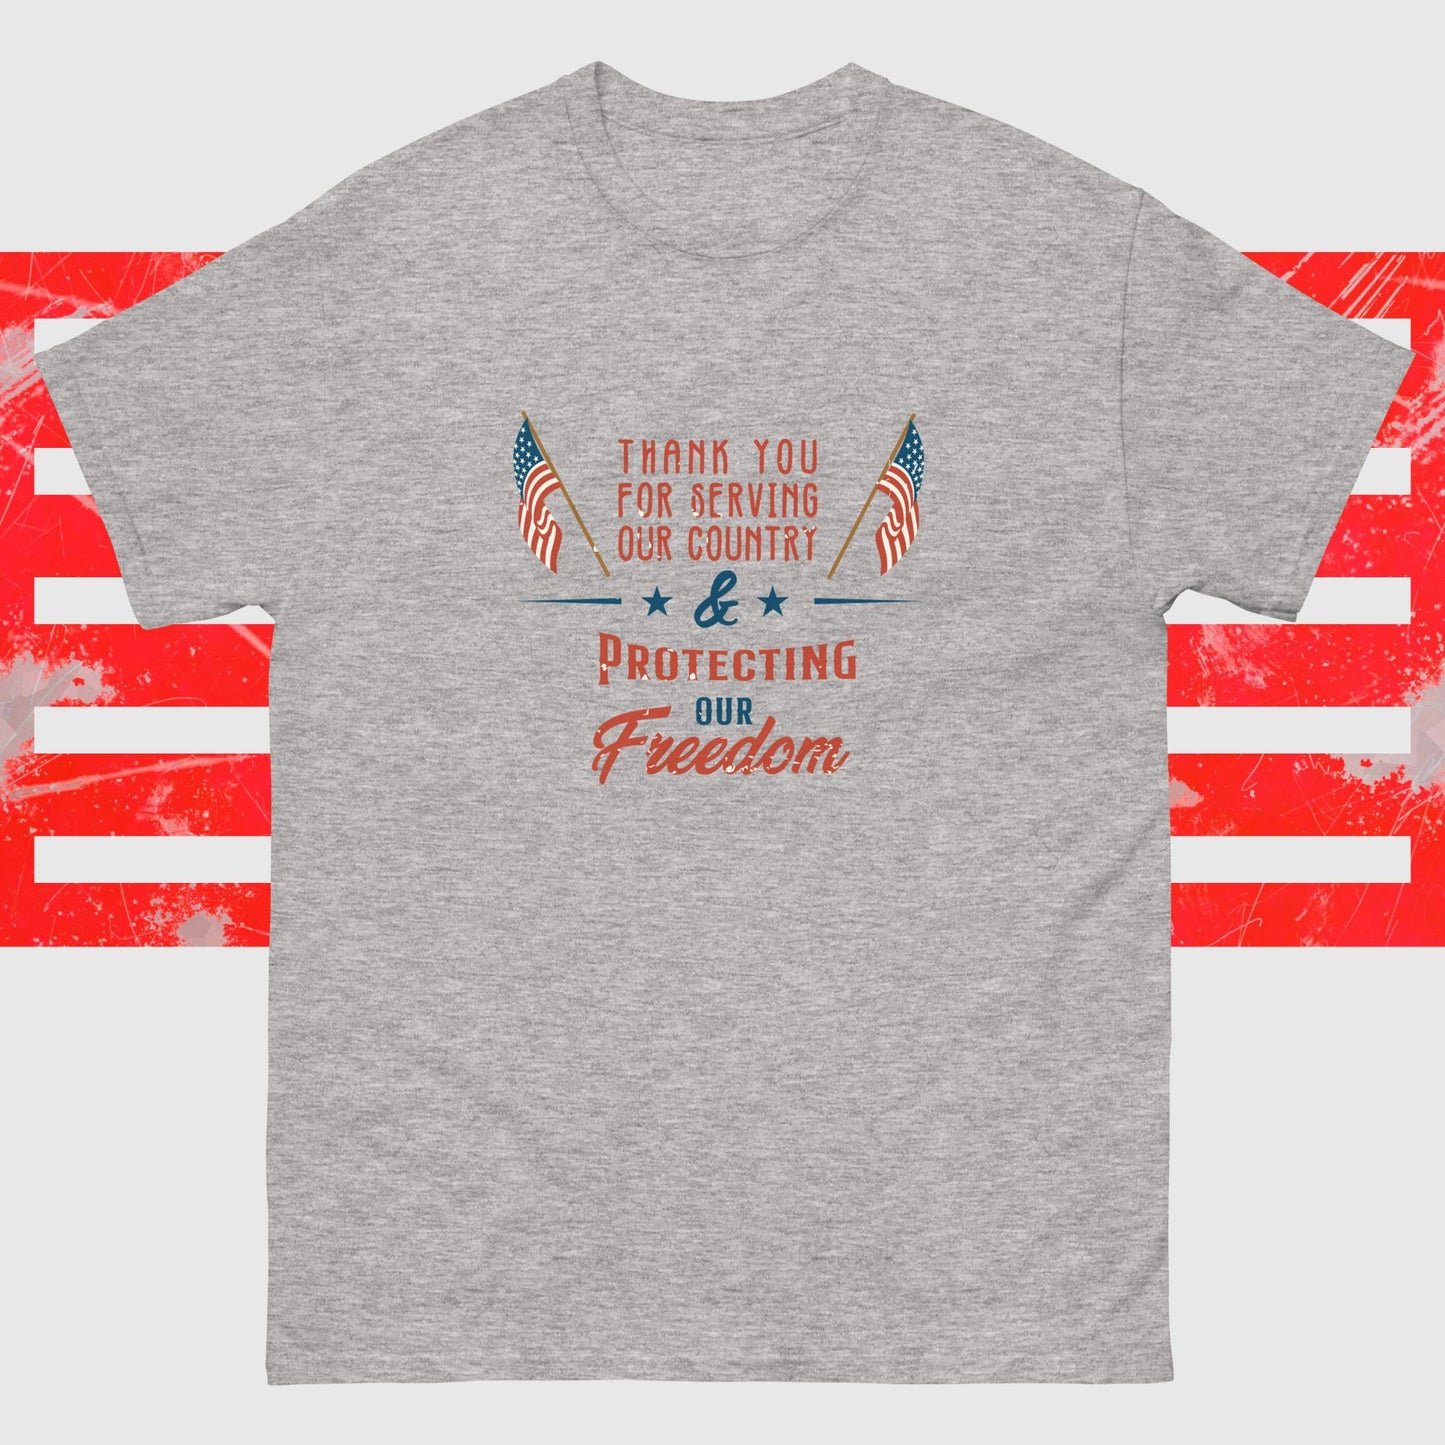 PATRIOTIC TEE FOR VETERANS DAY PROTECTING FREEDOM GREY FRONT - www.firstamericanstore.com